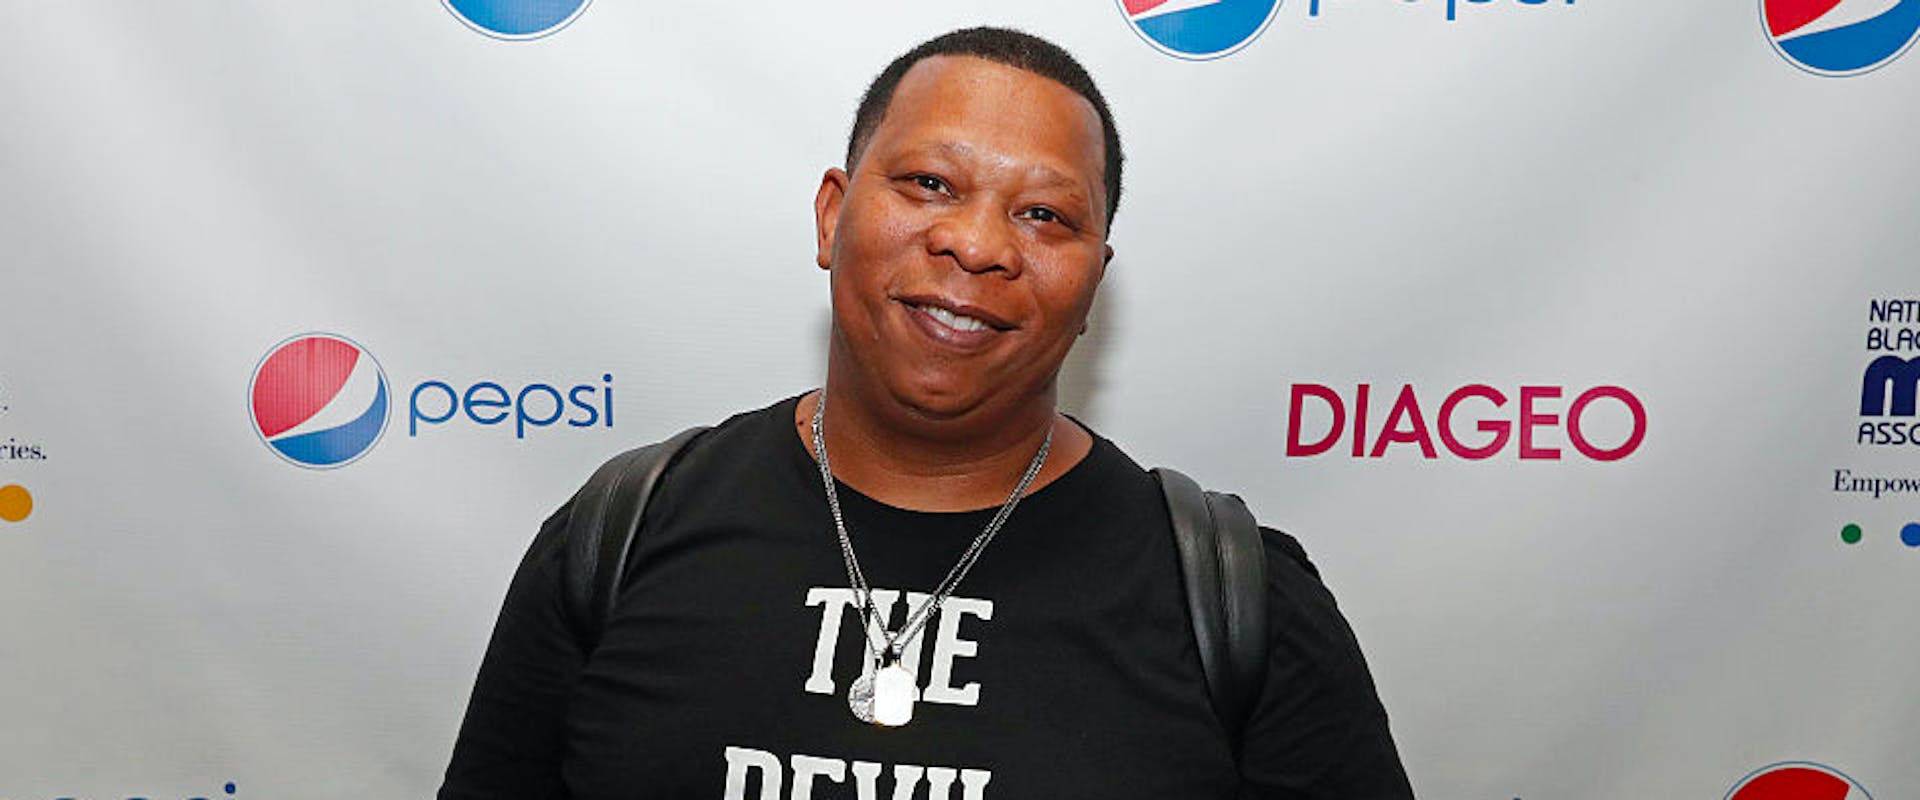 NEW ORLEANS, LA - OCTOBER 14: DJ Mannie Fresh attends The National Black MBA Association Presents 2nd Annual Pepsi MBA Live at The Metropolitan on October 14, 2016 in New Orleans, Louisiana. (